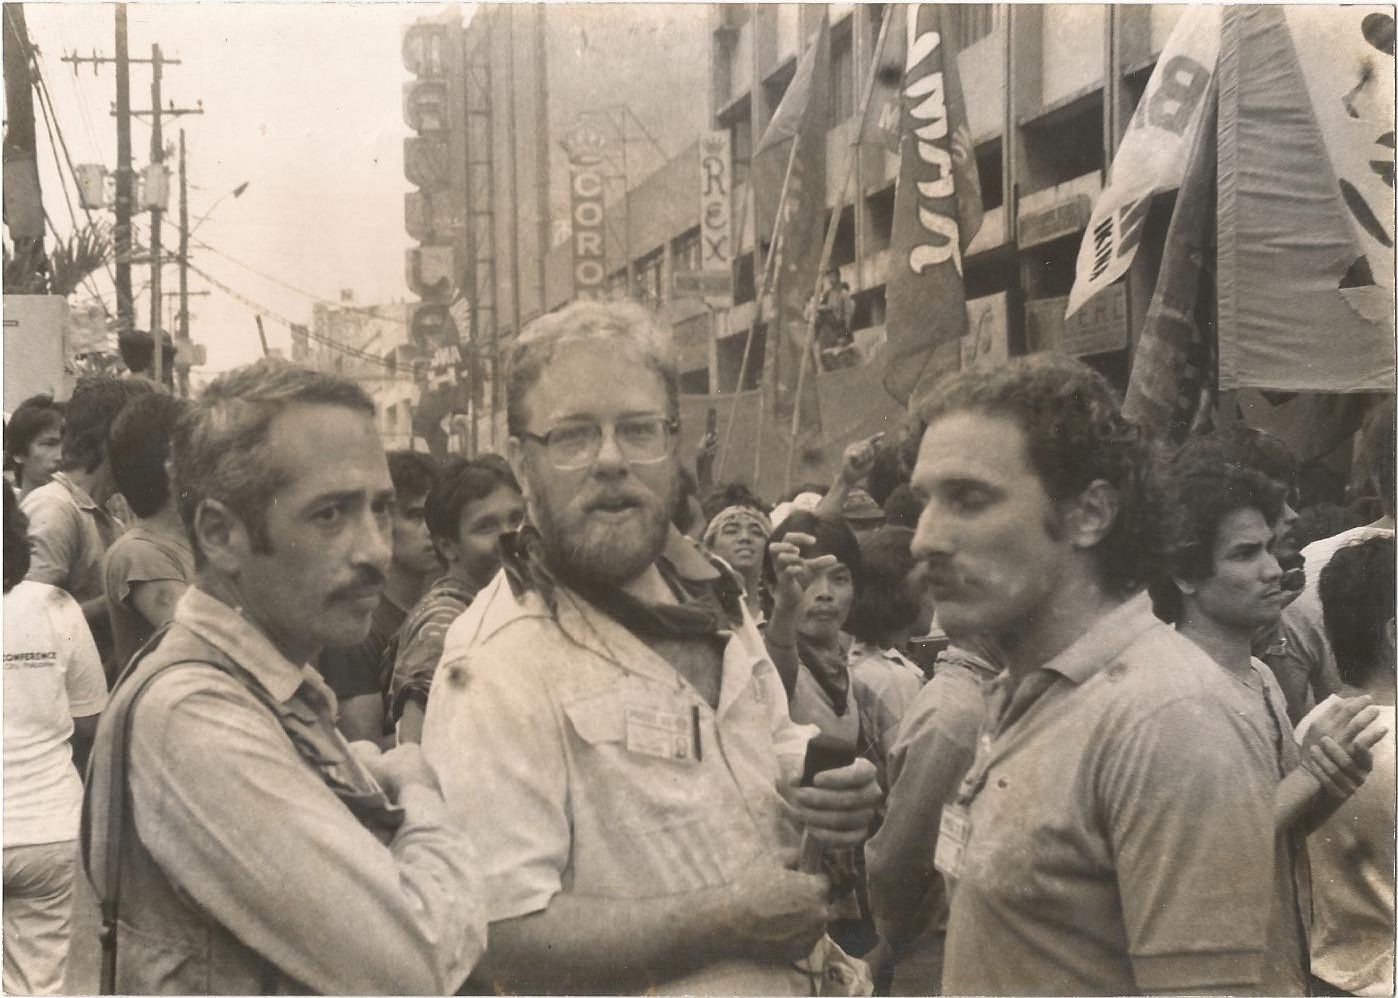 COVERING A REVOLUTION. Foreign correspondents (from right) Joe Cantrell, Lin Neumann, and Guy Sacerdoti. Photo courtesy of Gregg Jones 